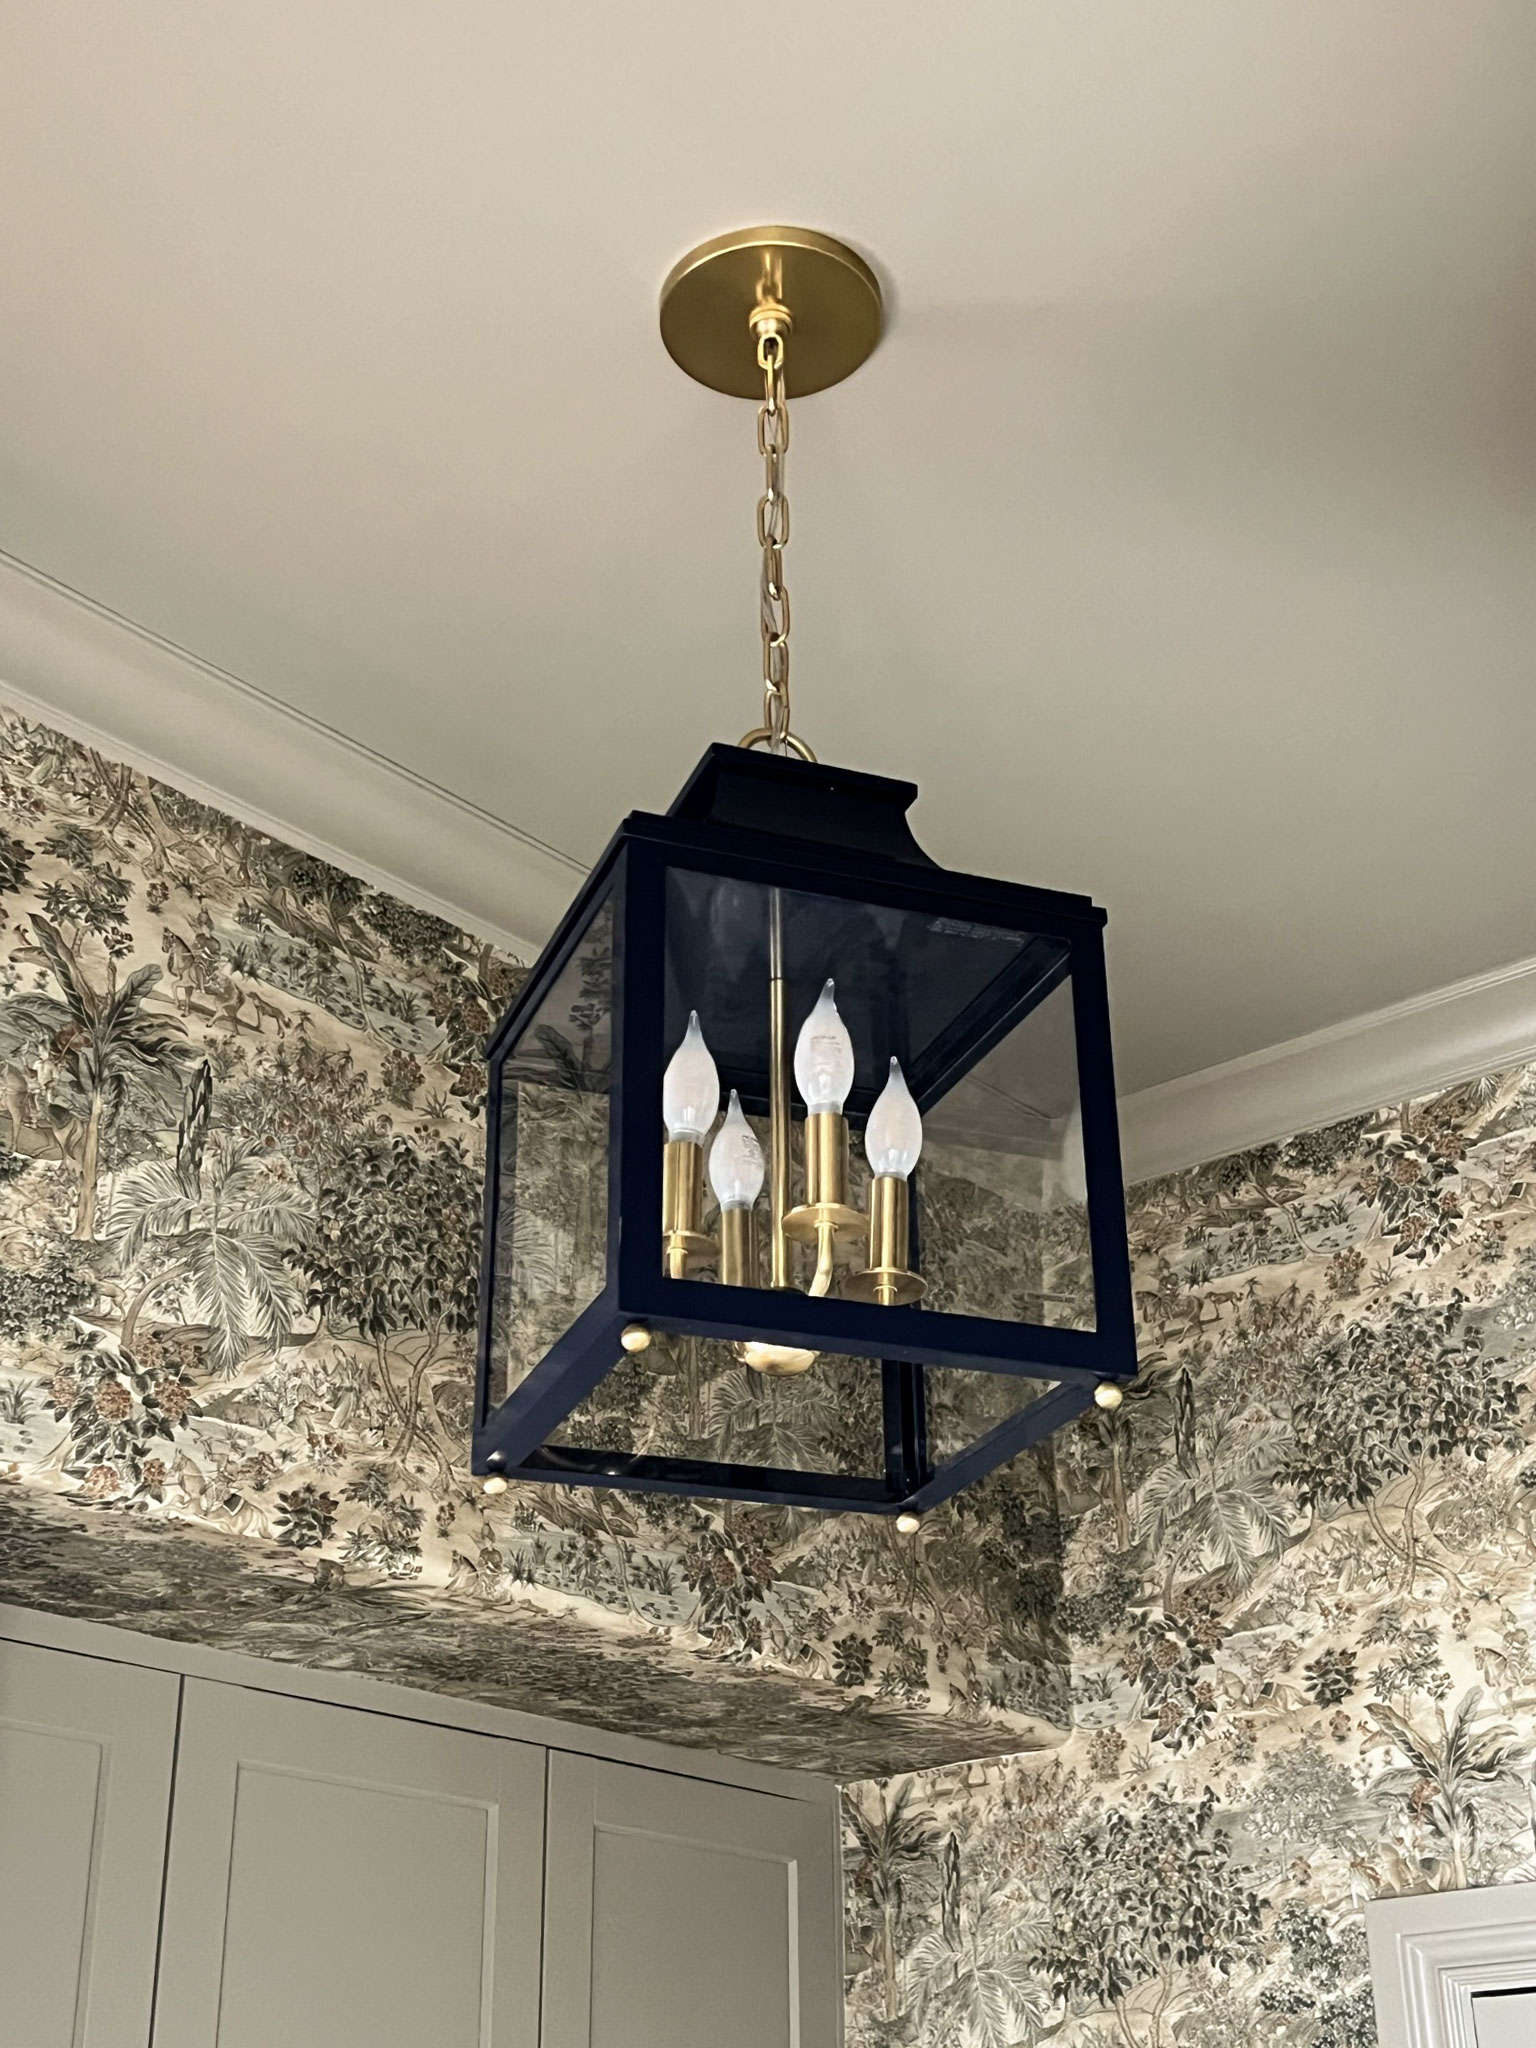 close up of lantern with navy blue and brass finish, with scenic wallpaper in the background